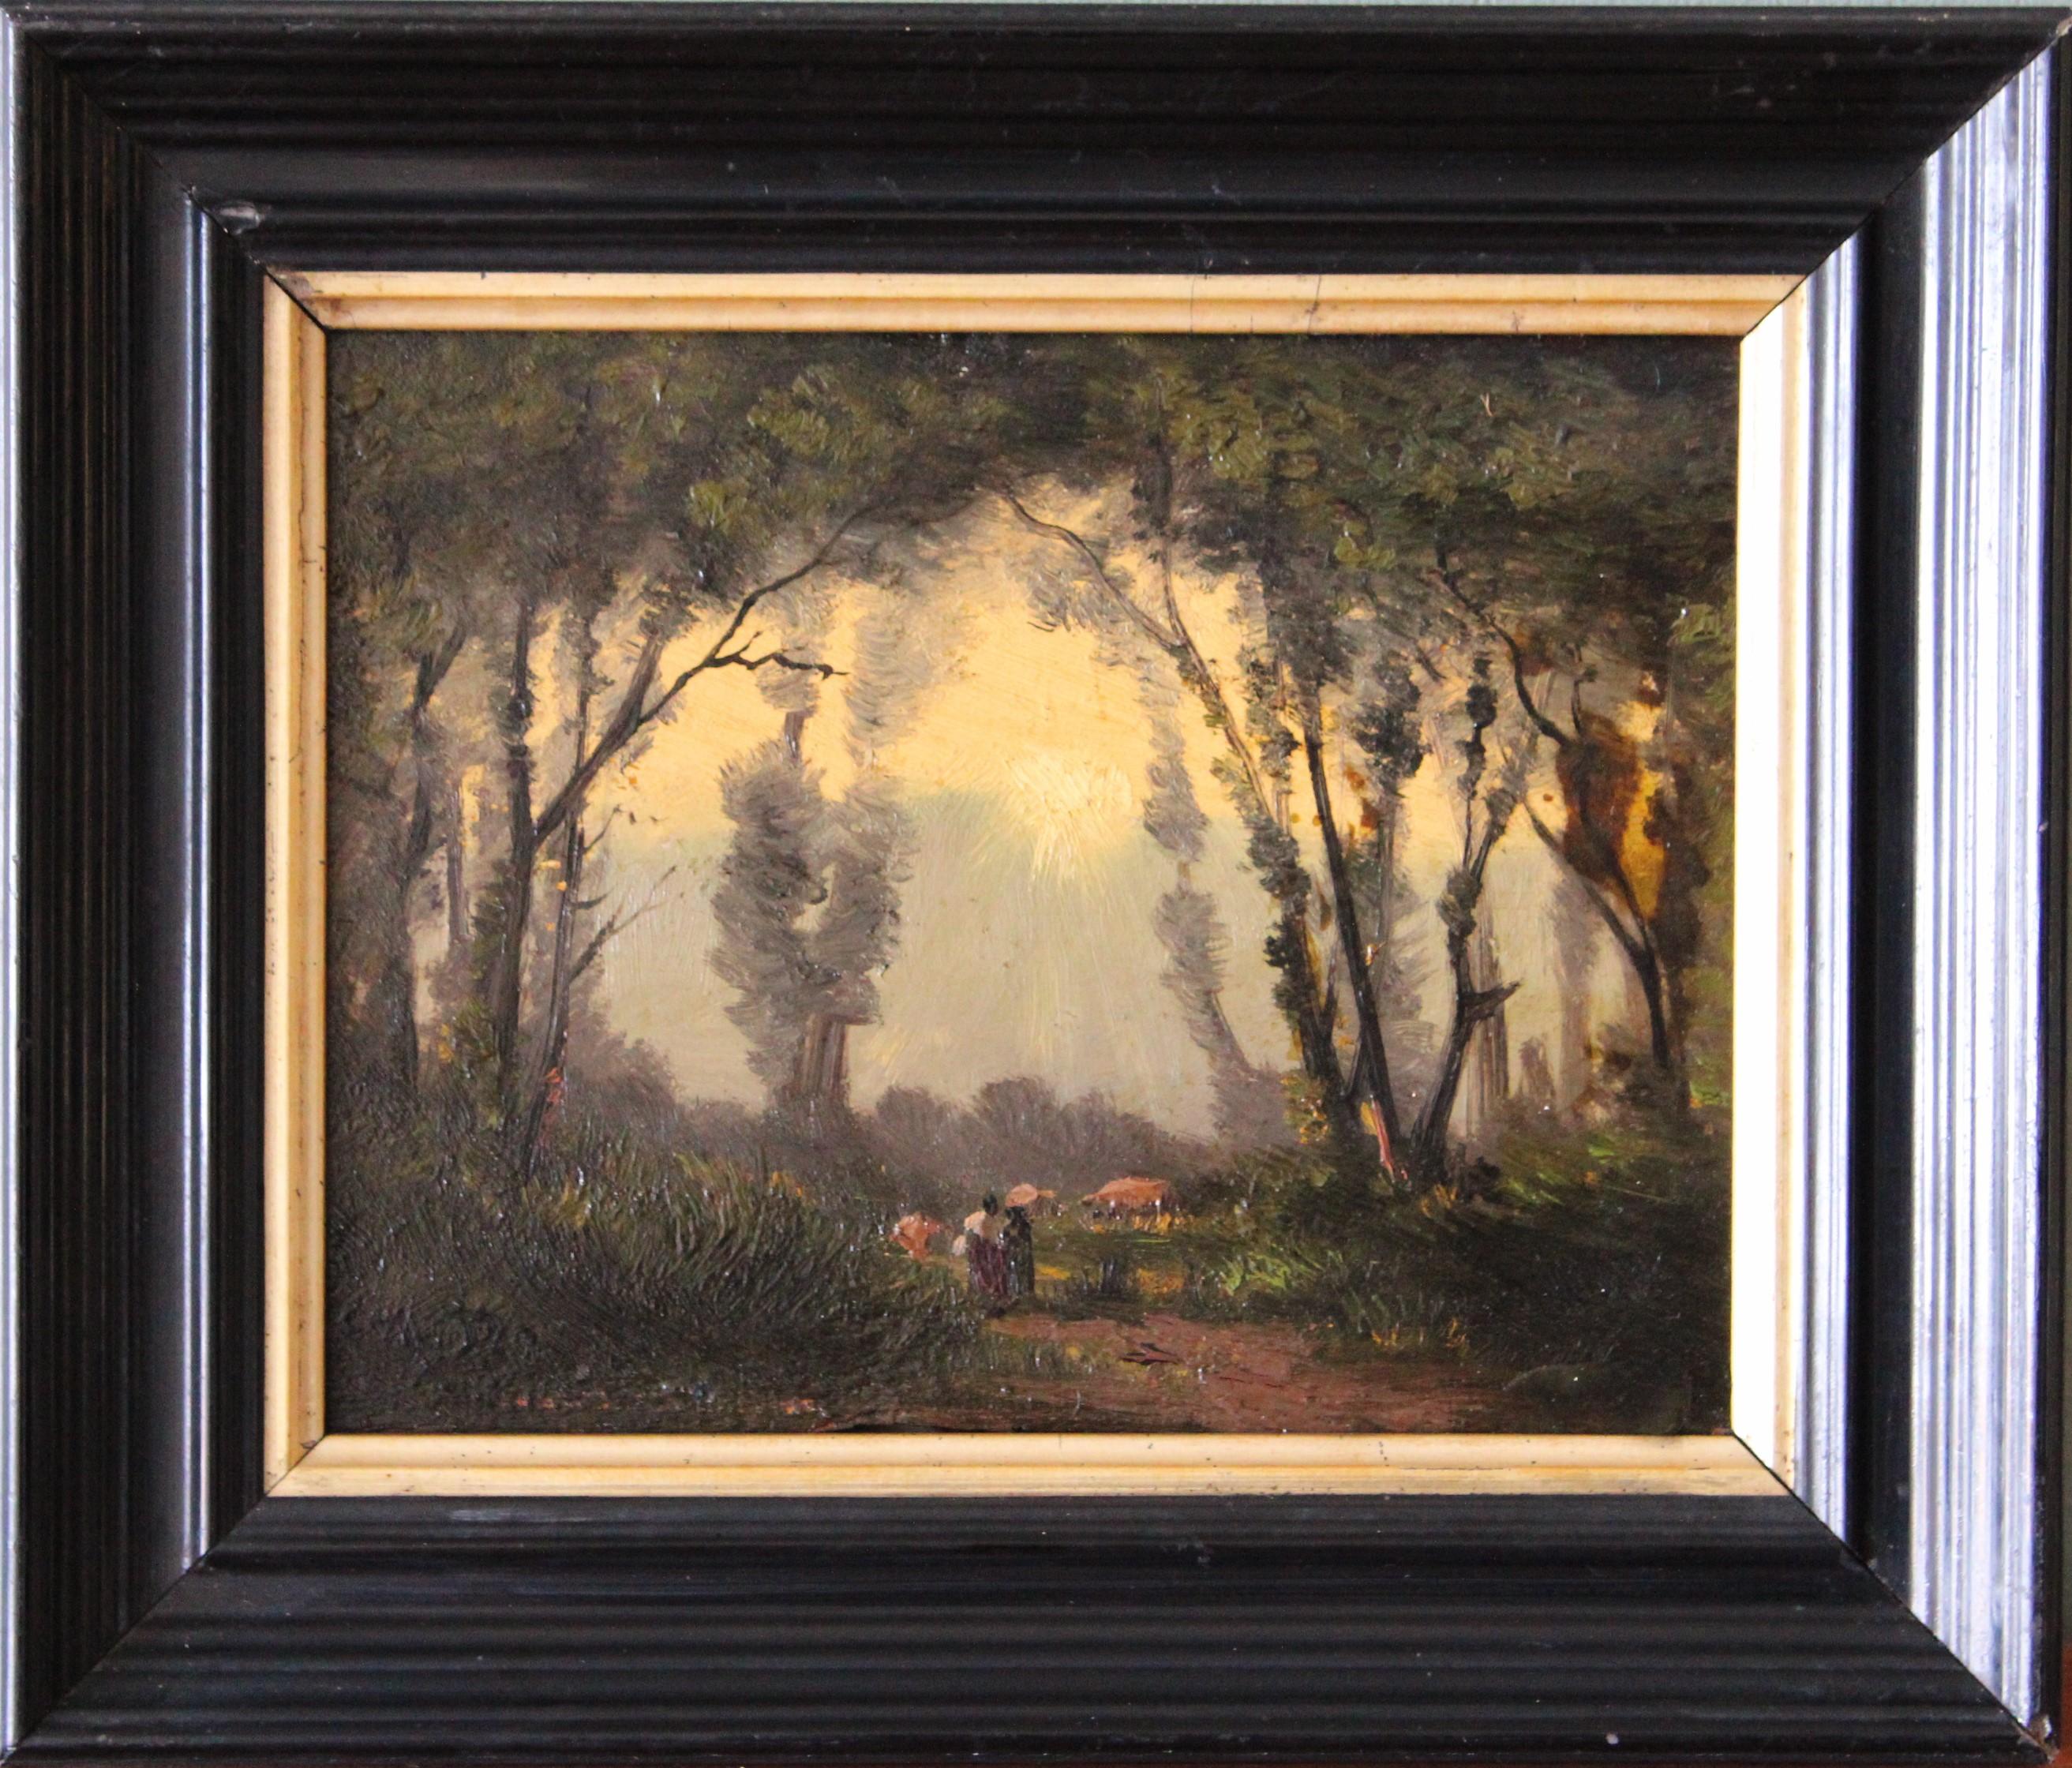 Antique landscape oil painting by French artist, Charles Donzel (1824-1889) annotations on the back.

Atmospheric small Barbizon oil painting on wood in a Napoleon III ebony style frame which complements the painting.  The board has a dark, and